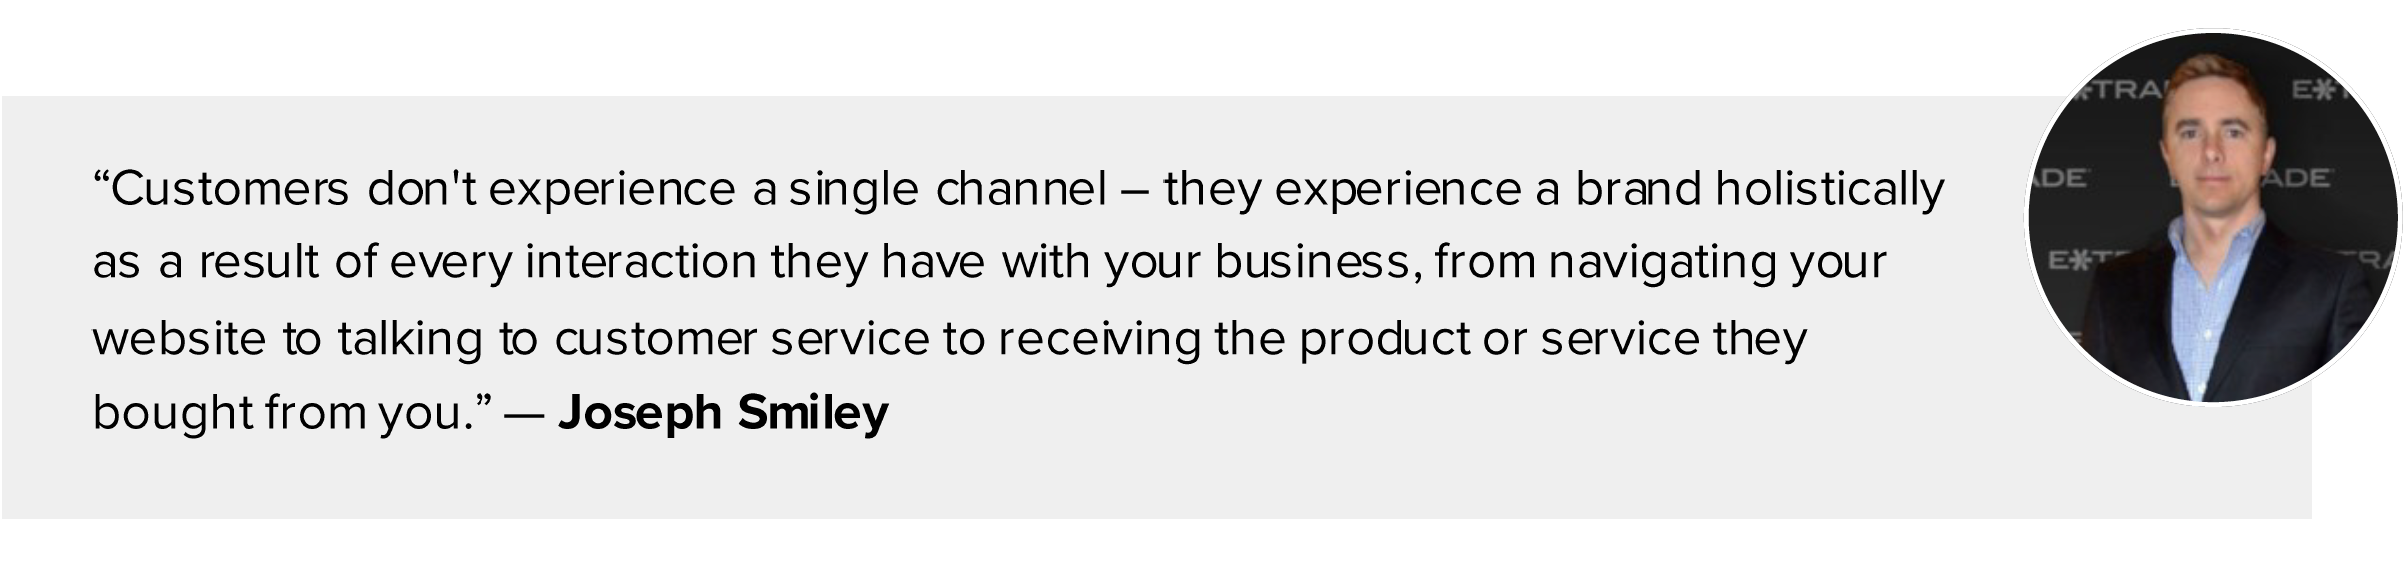 quote - creating consistent and secure customer experiences